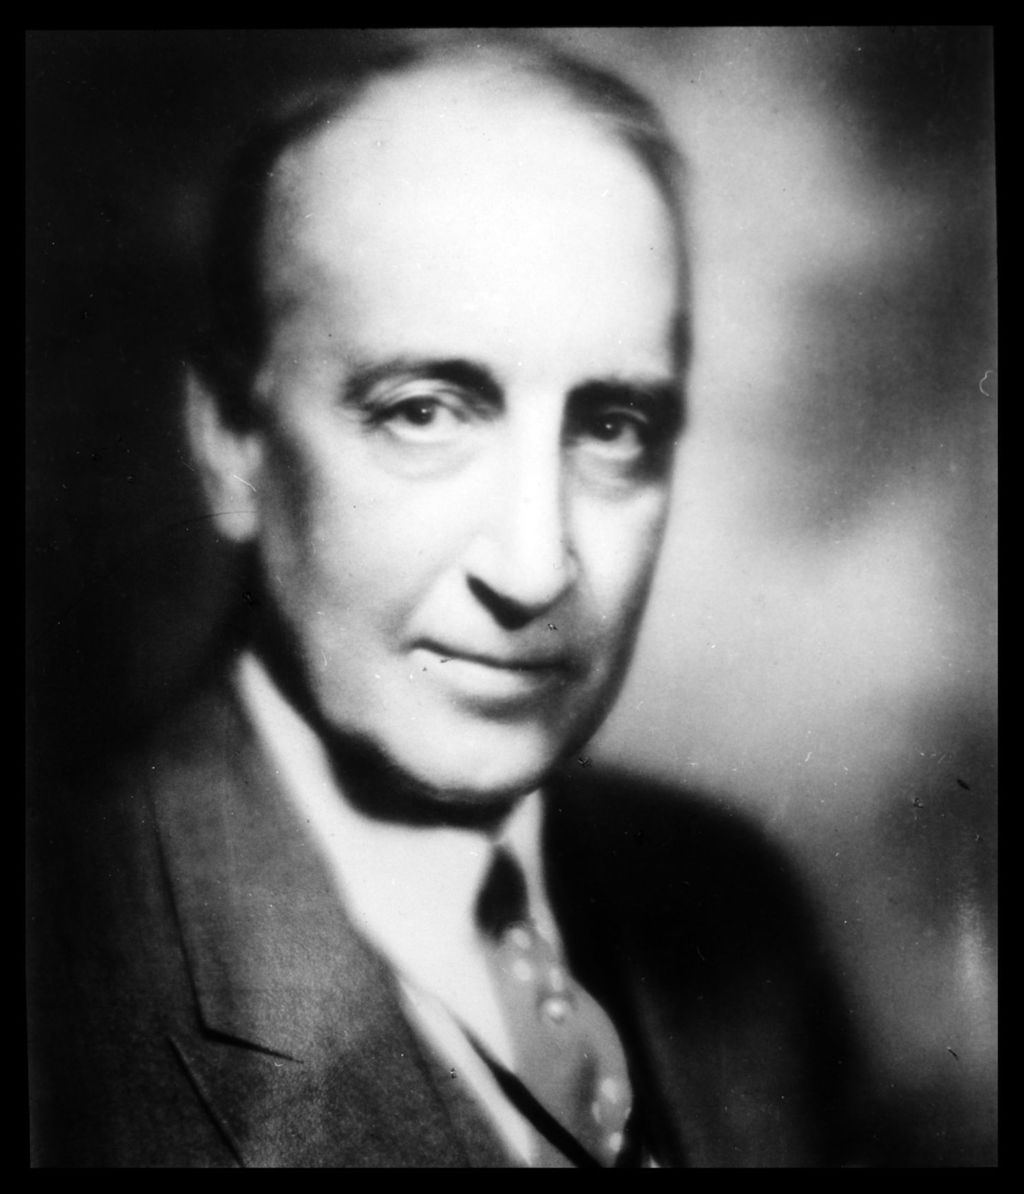 Lenox R. Lohr, general manager of the exposition.